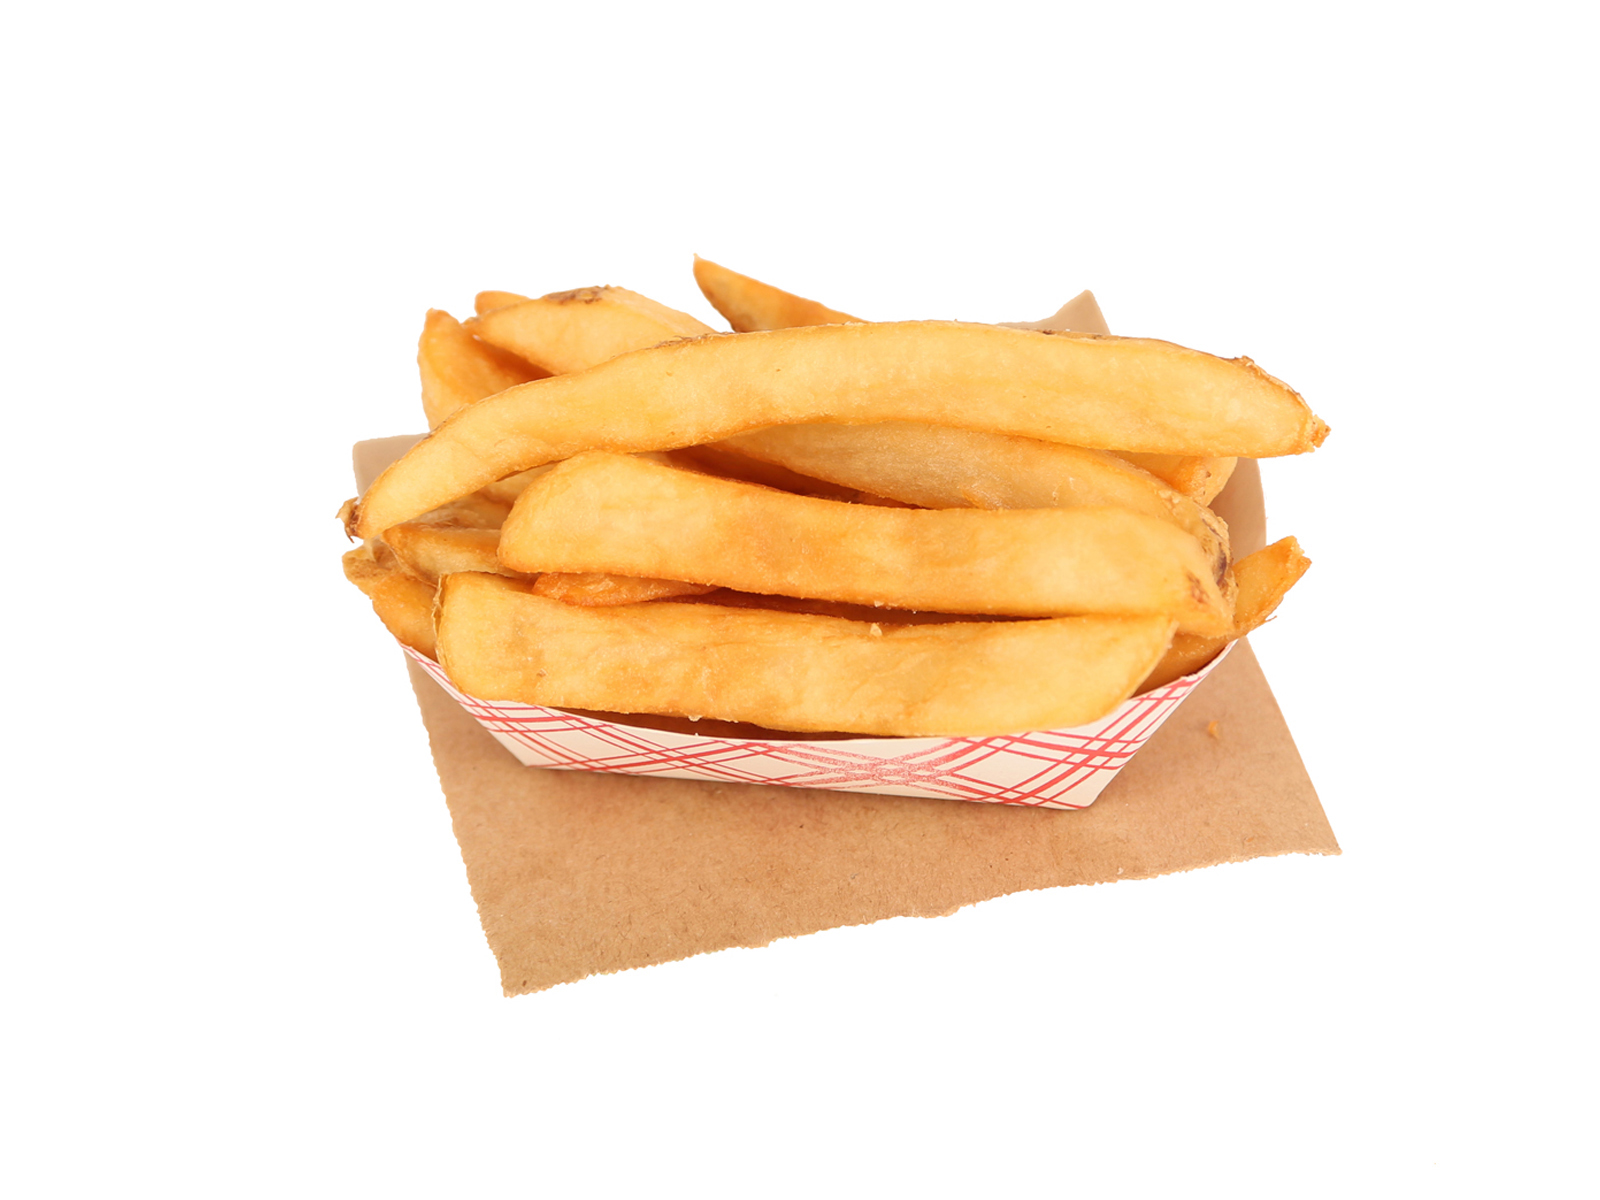 Small serving of french fries